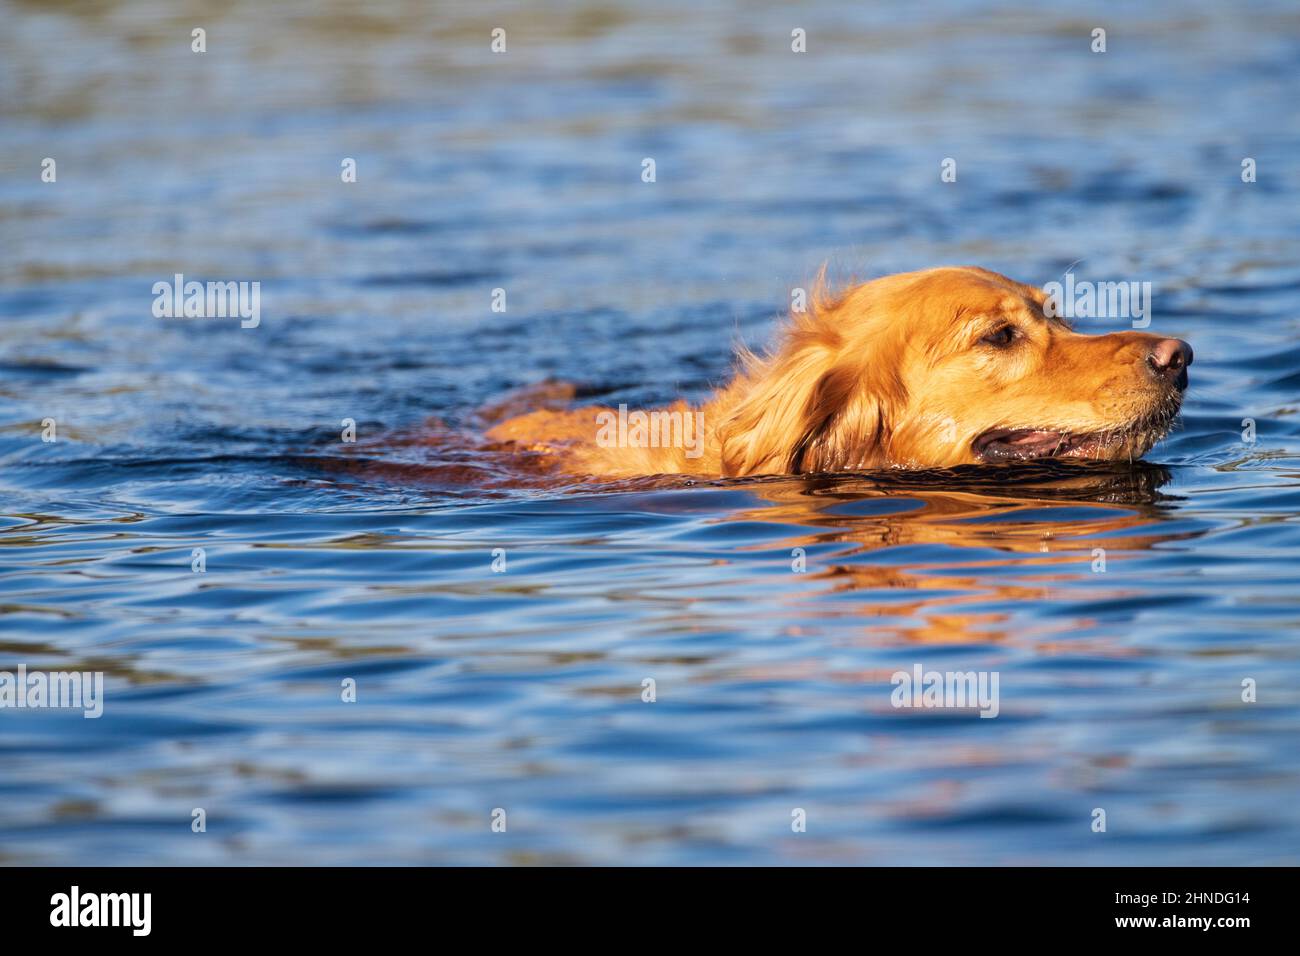 Golden Retriever swimming in a pond. Photographed in Shasta County, California, USA. Stock Photo